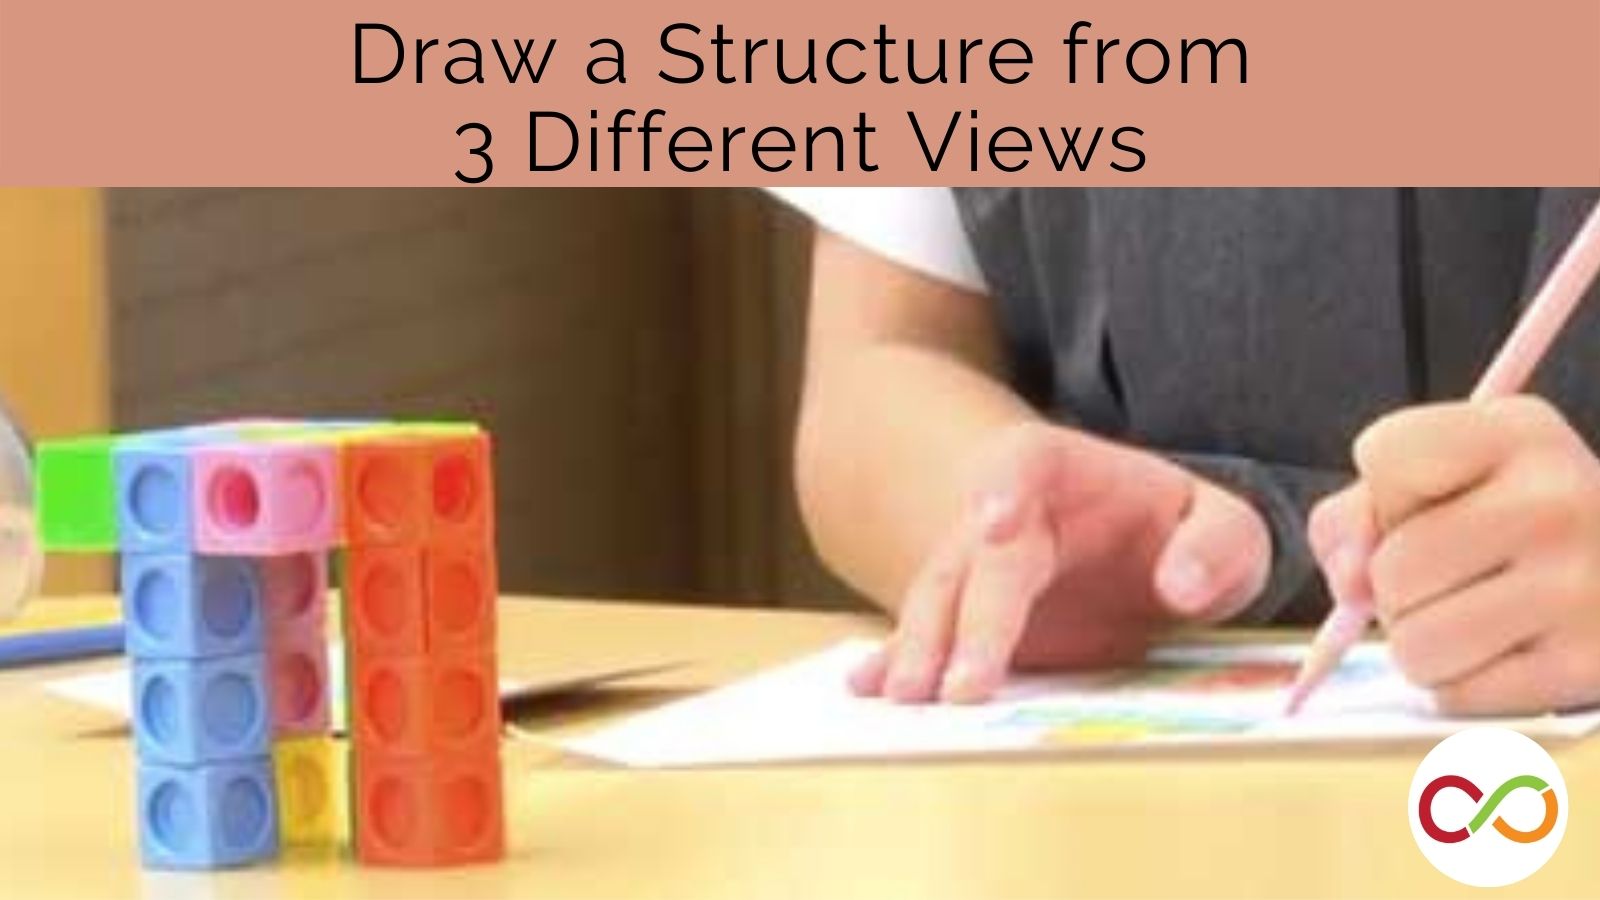 An image linking to the draw a structure from 3 different views lesson